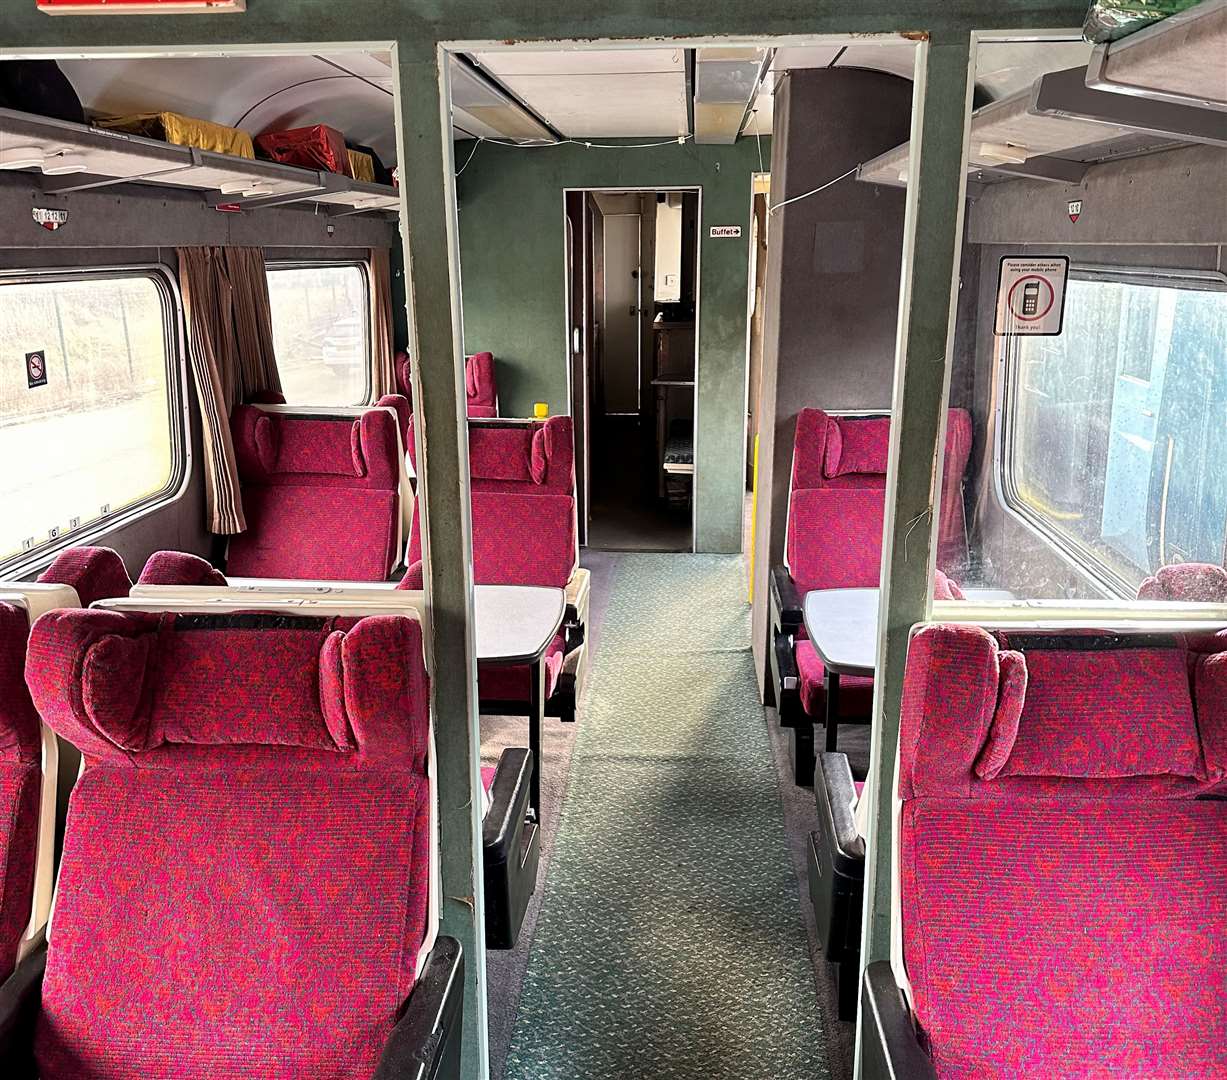 Inside the train carriage that Five Acre Wood School intends to transform into a cafe. Picture: Five Acre Wood